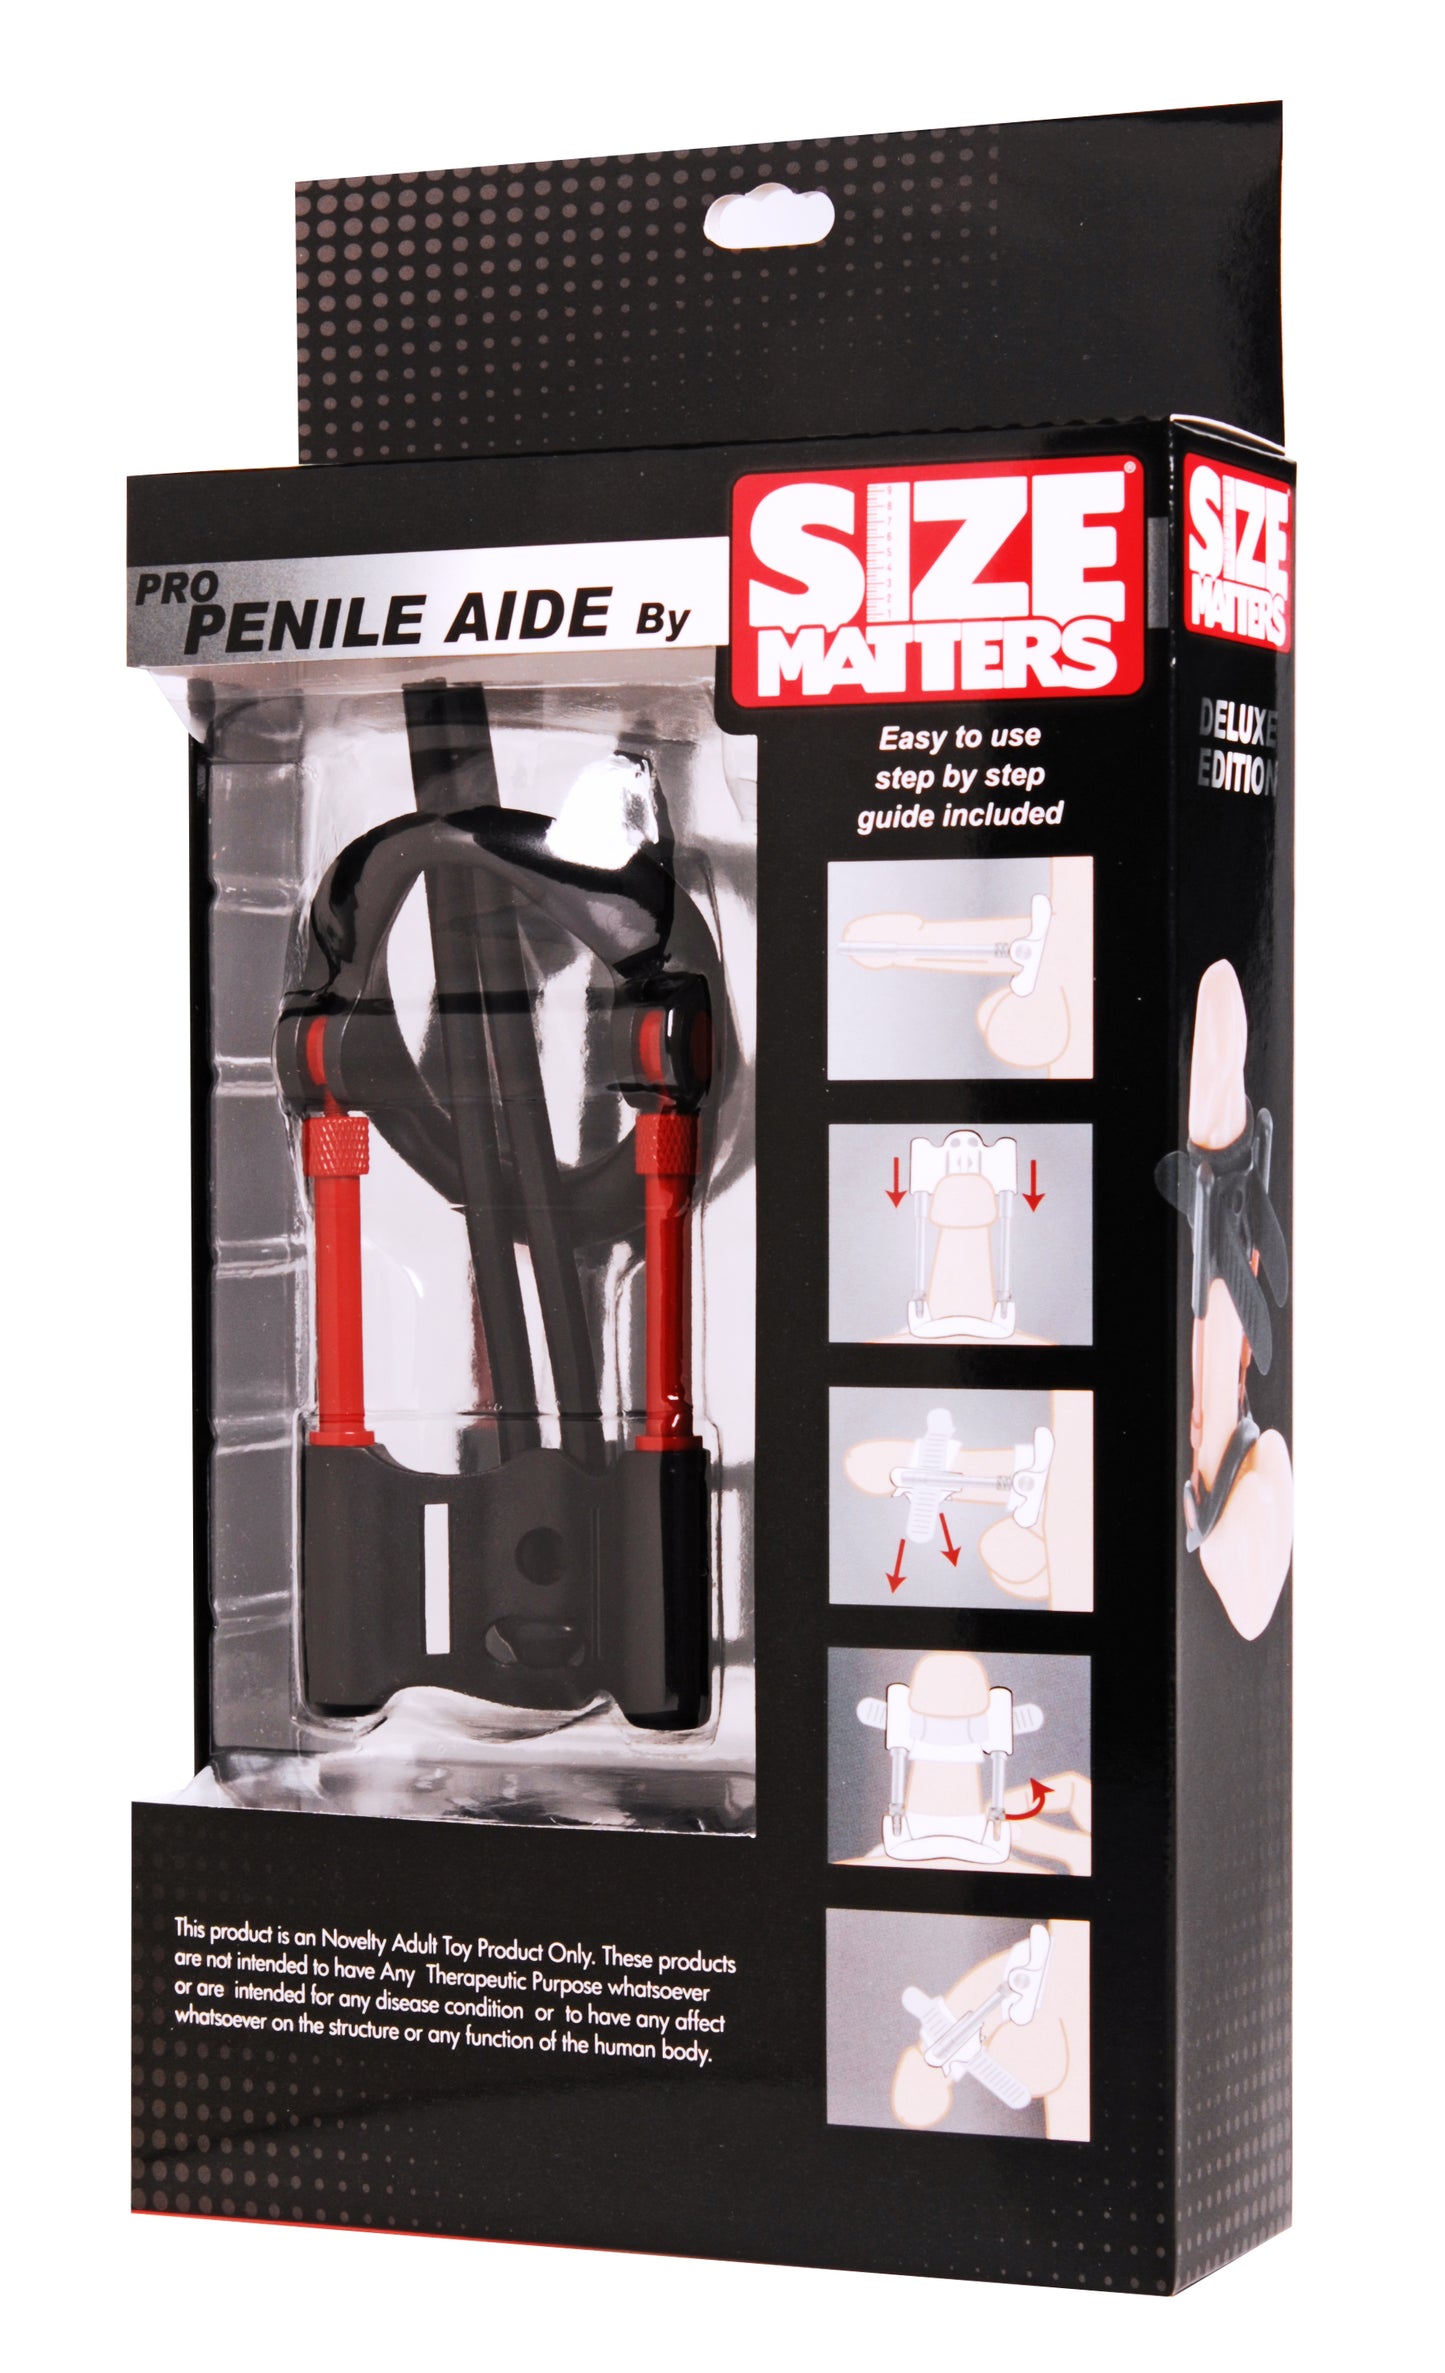 Size Matters Pro Penile Aide - Just for you desires